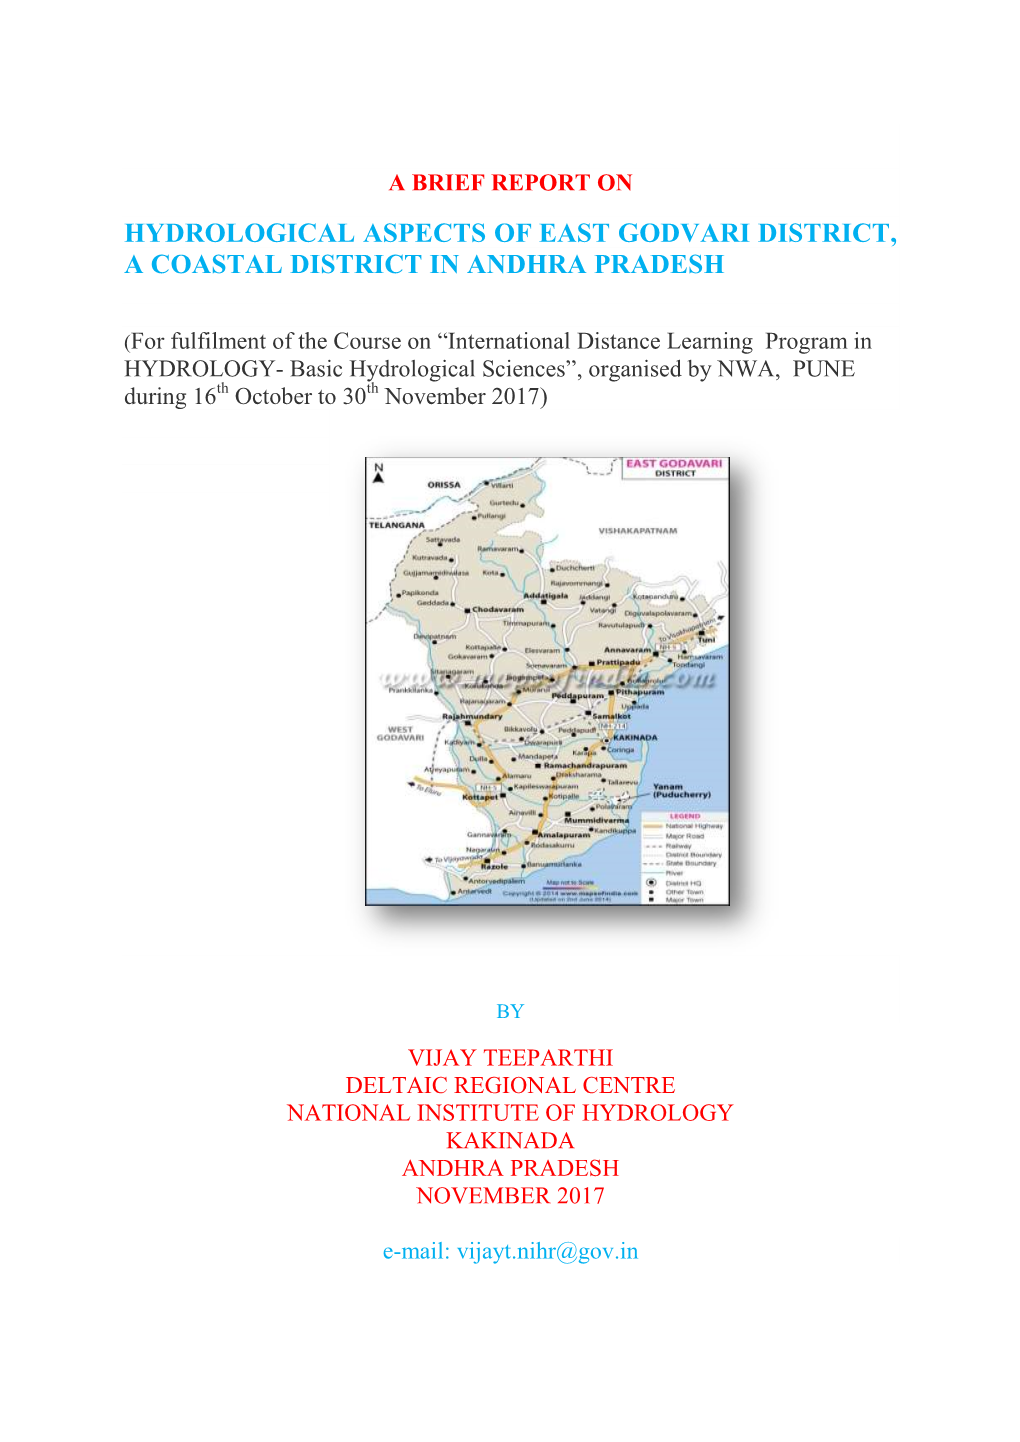 Hydrological Aspects of East Godvari District, a Coastal District in Andhra Pradesh